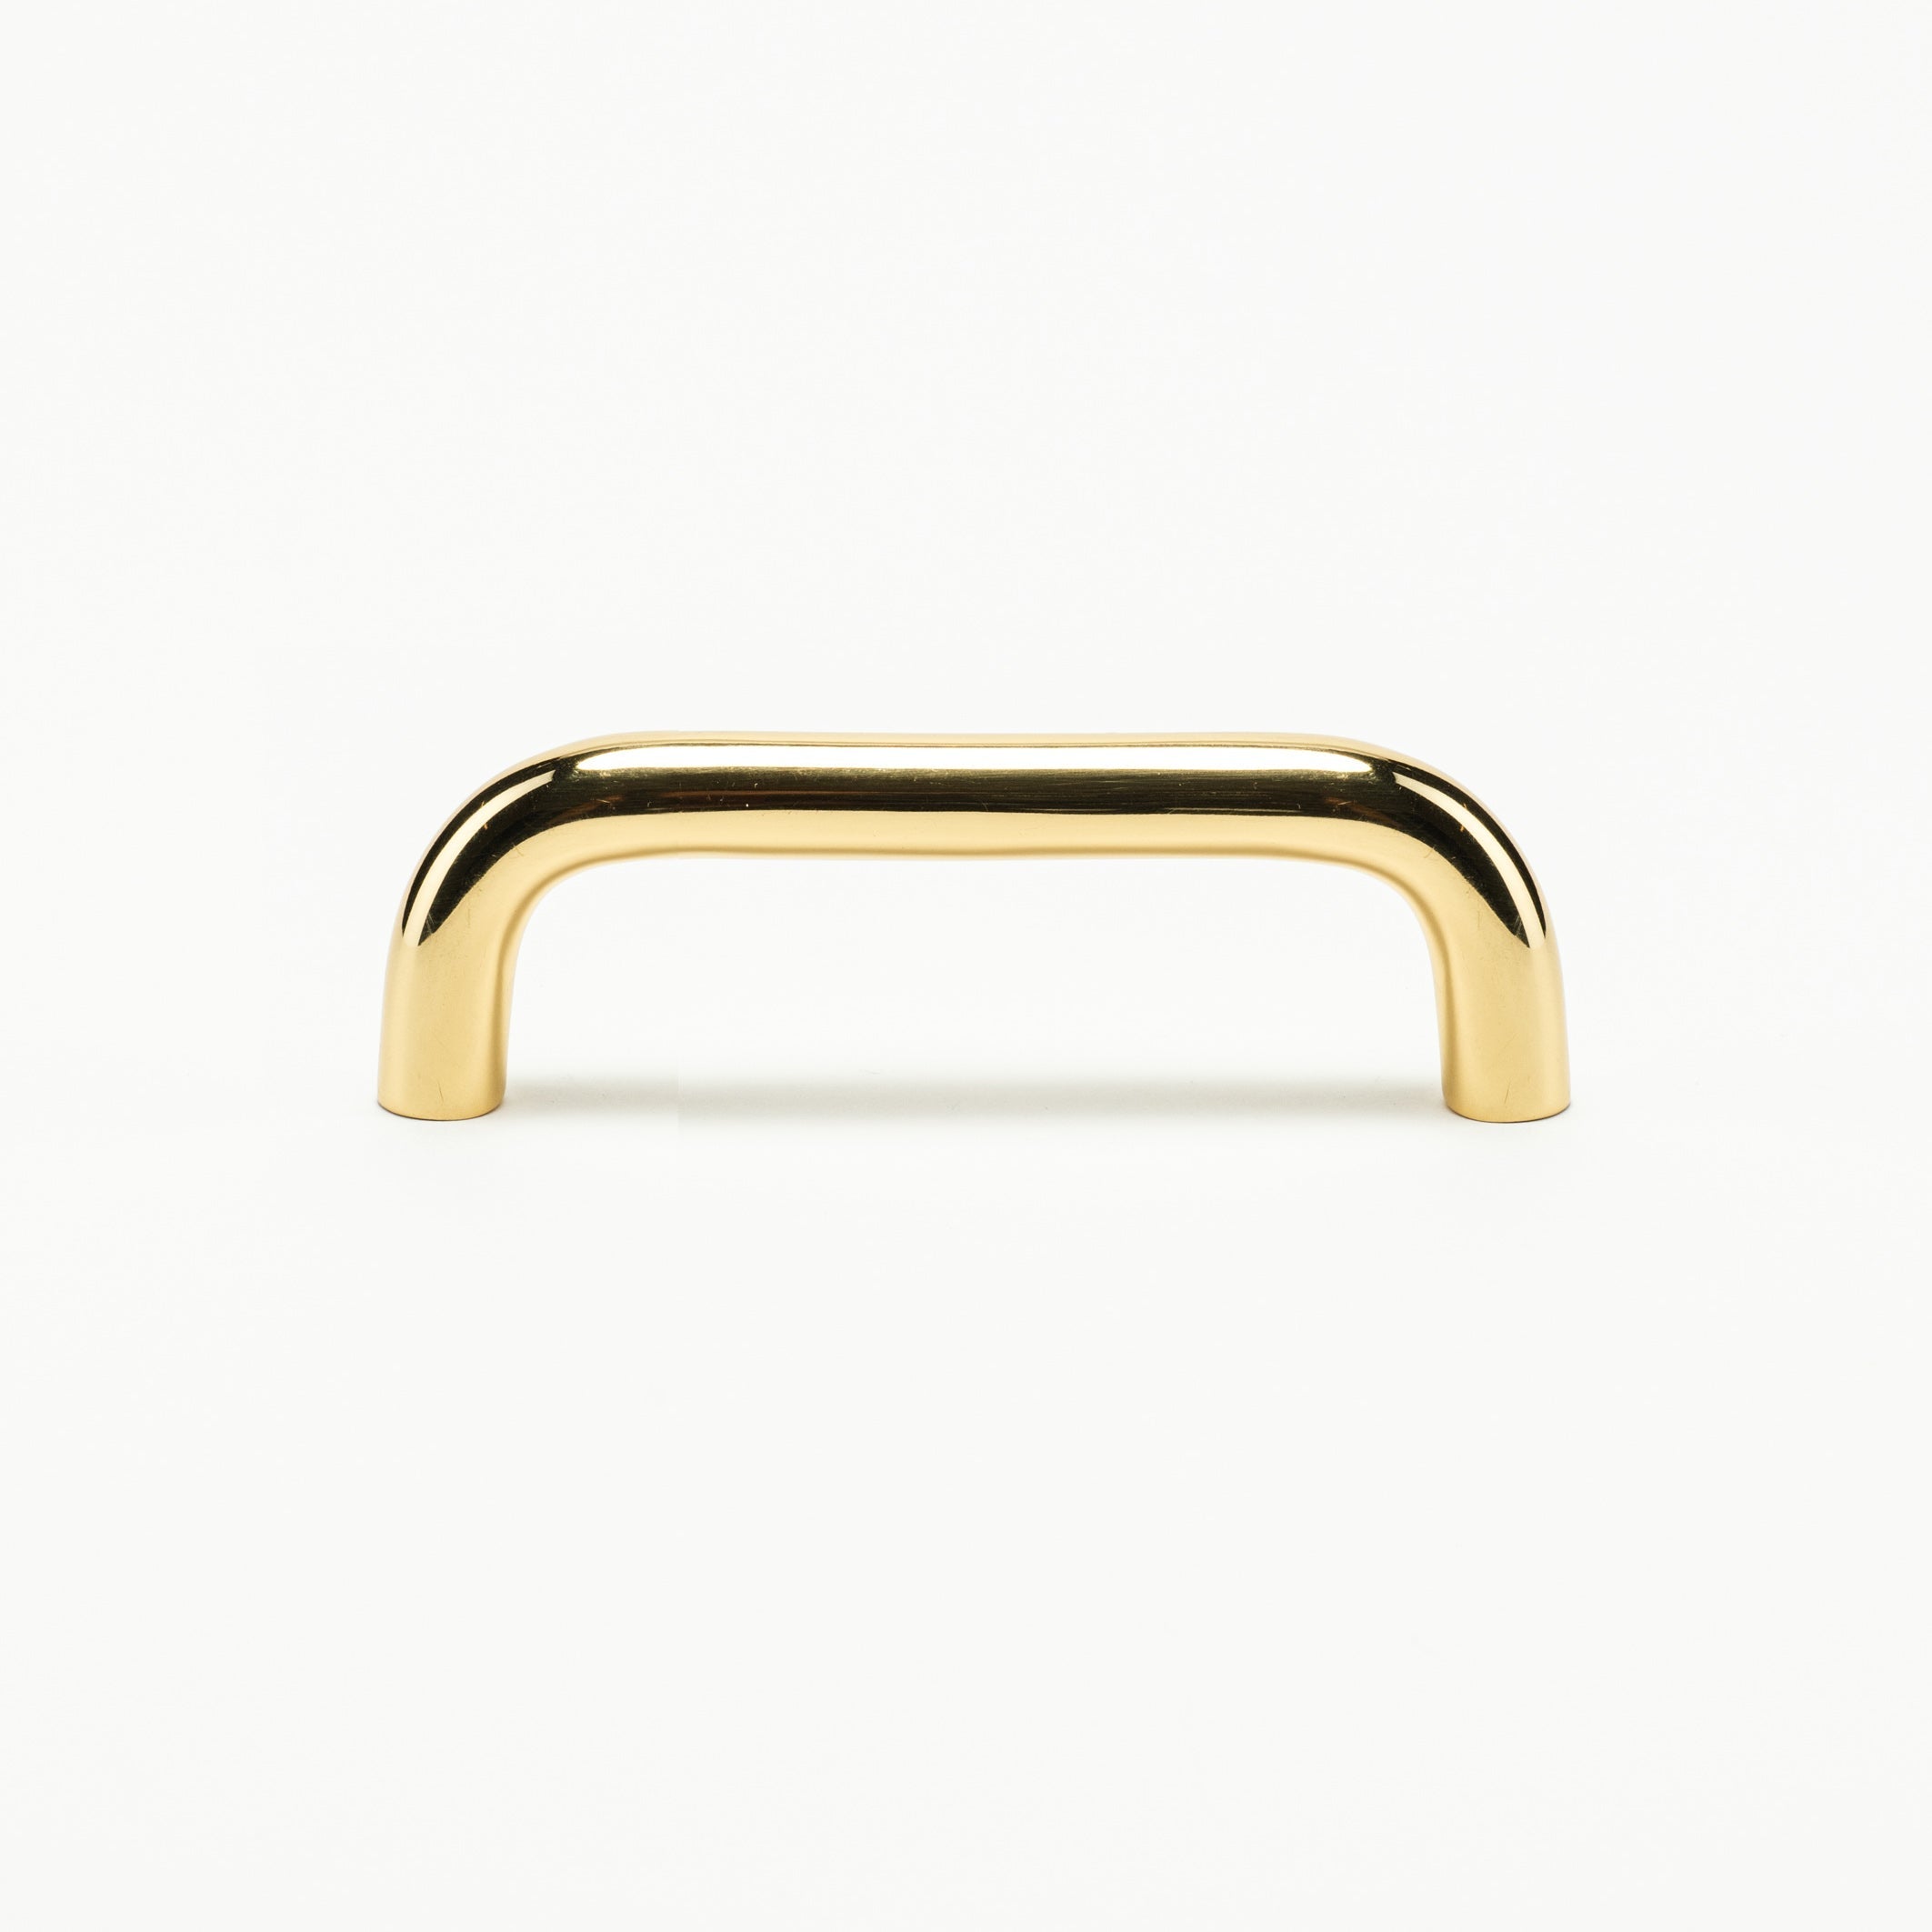 D Pull (4 c-c) - Drawer Pulls in Polished Brass, Polished Nickel,  Burnished Brass - In Stock